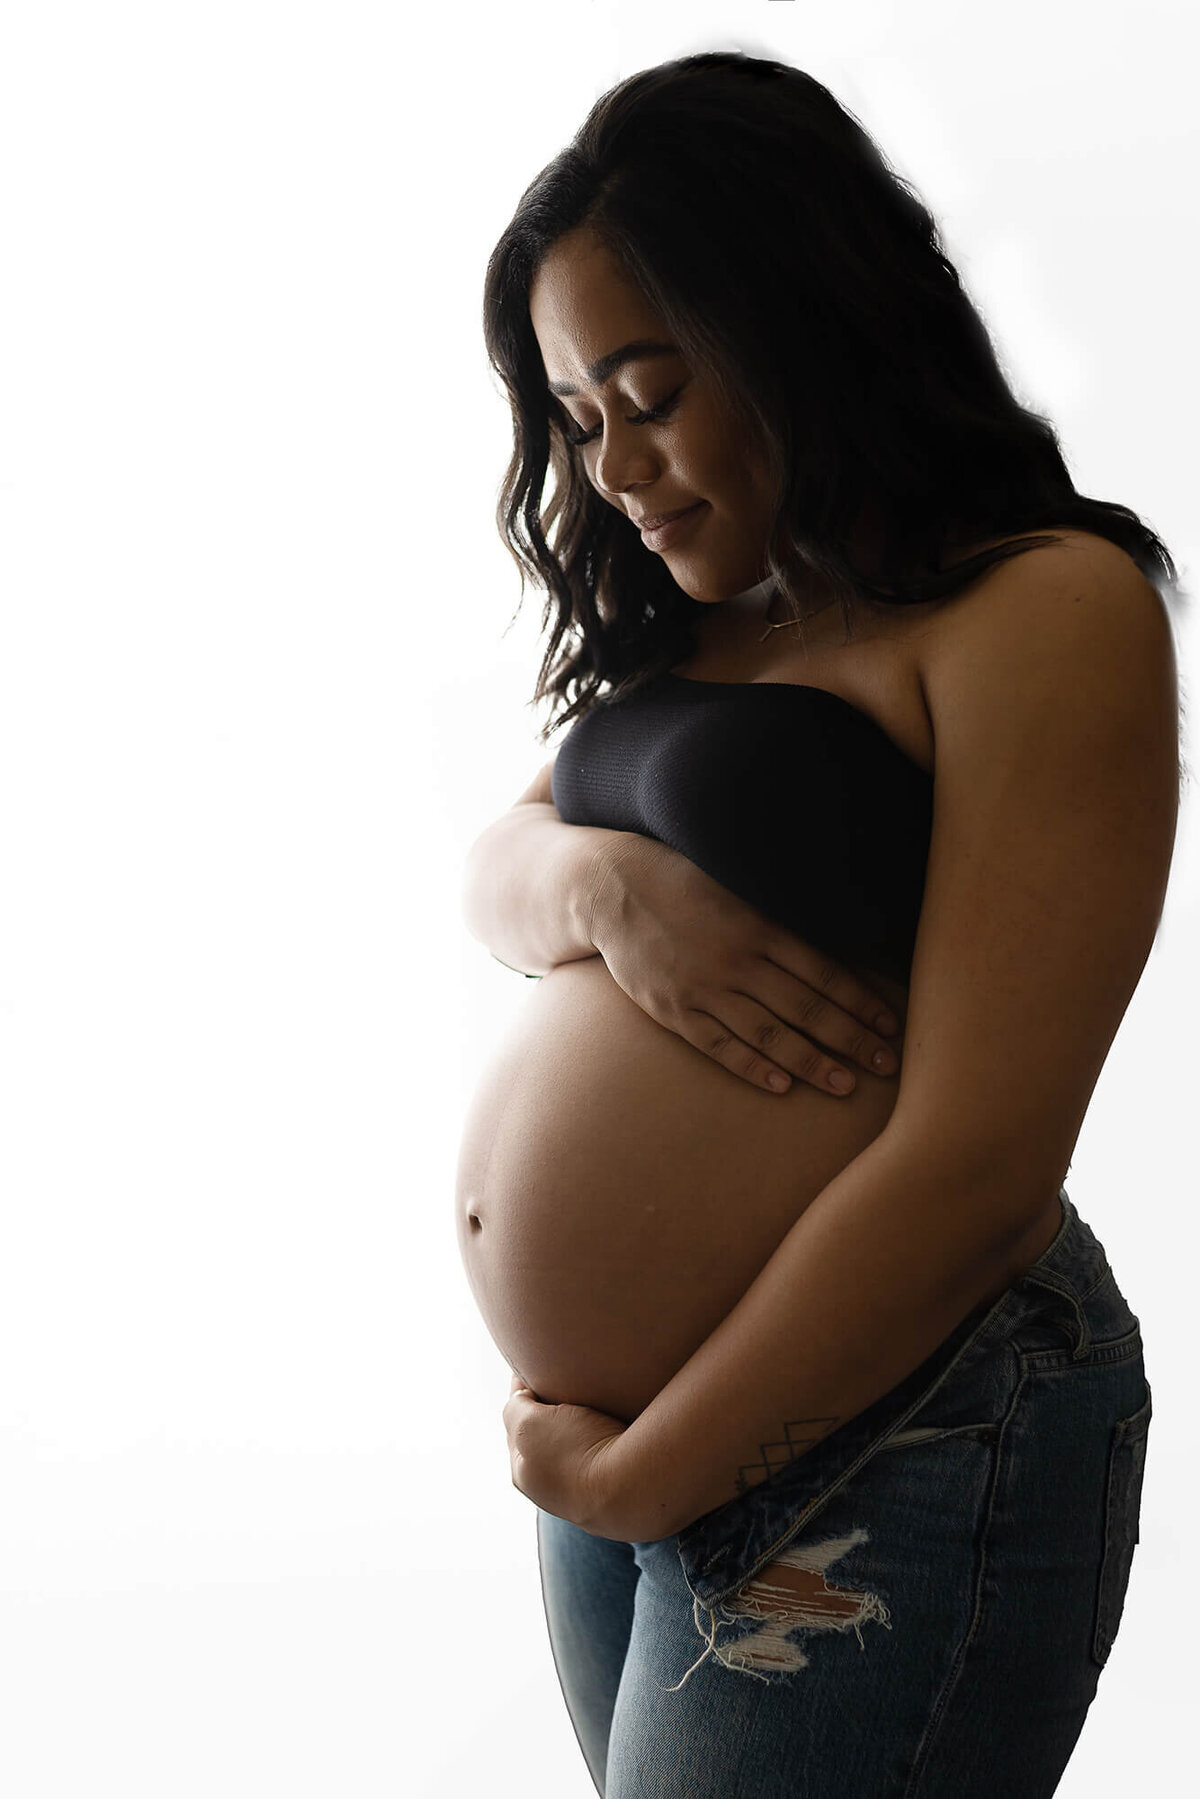 Pregnant woman posed hugging her belly.